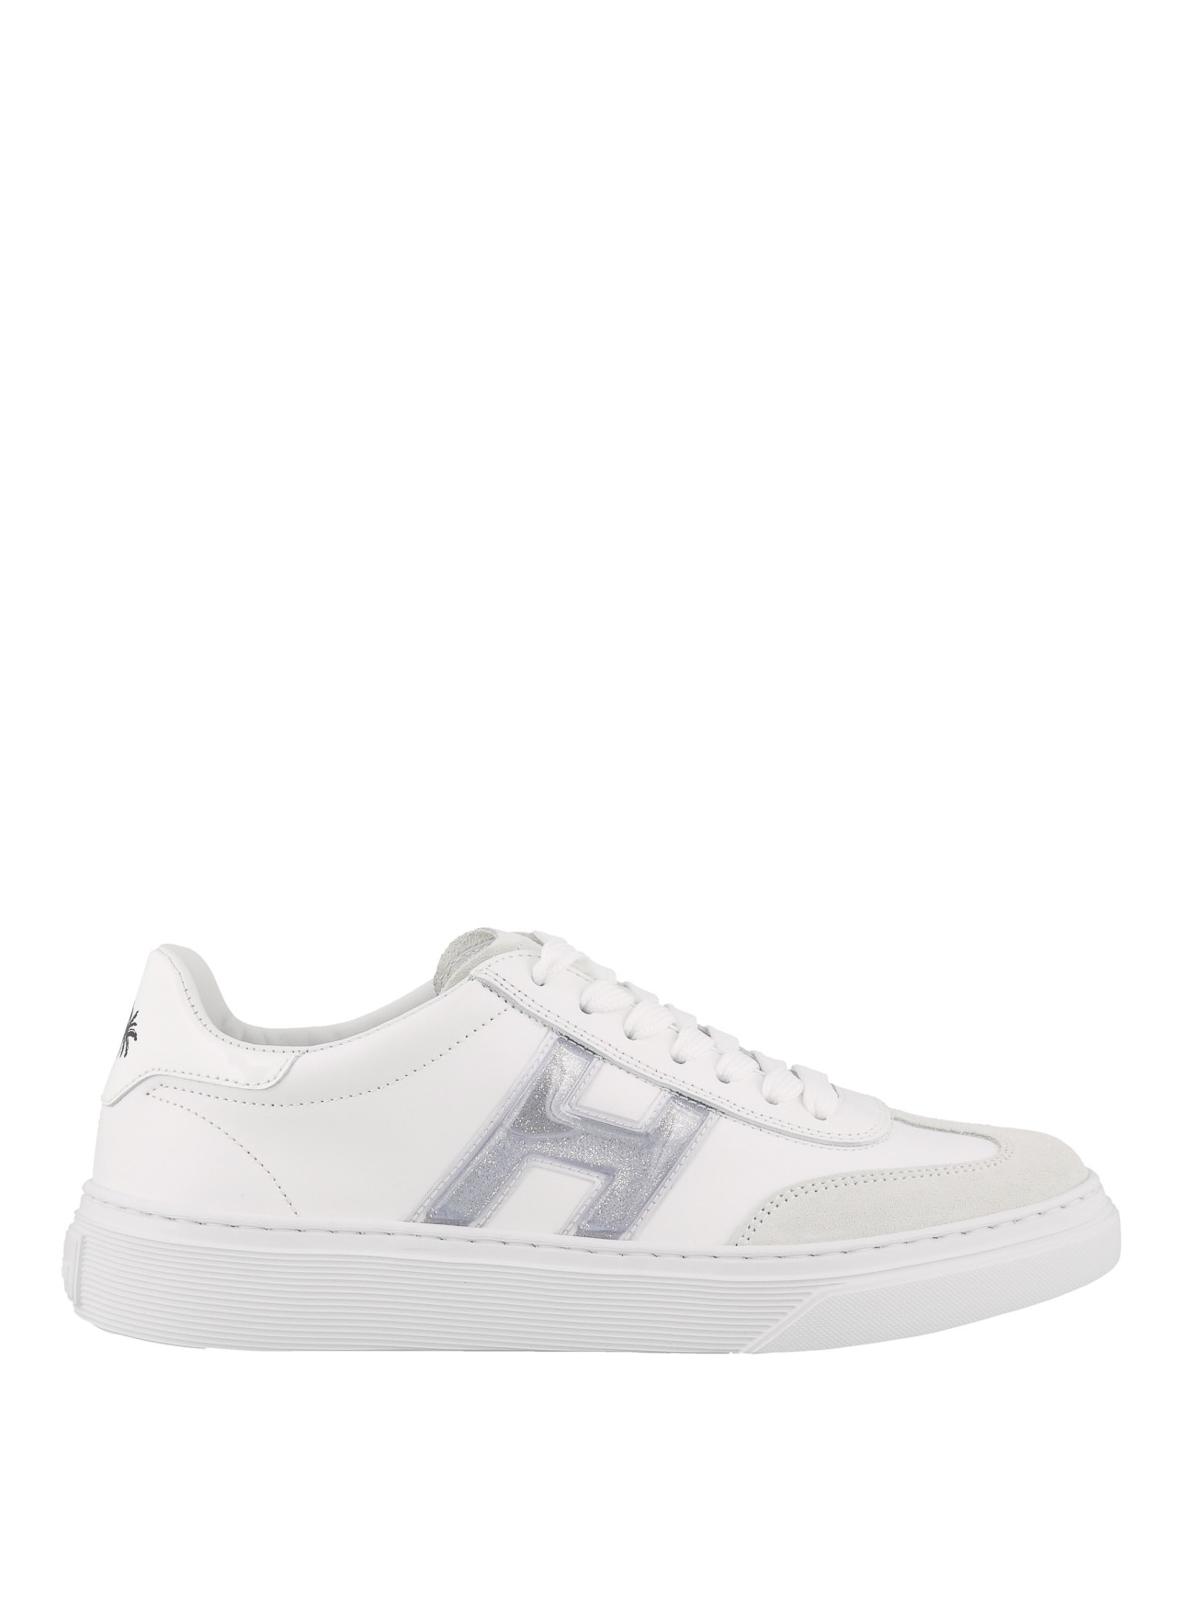 Hogan H365 Leather And Suede Low Top Sneakers in White - Lyst